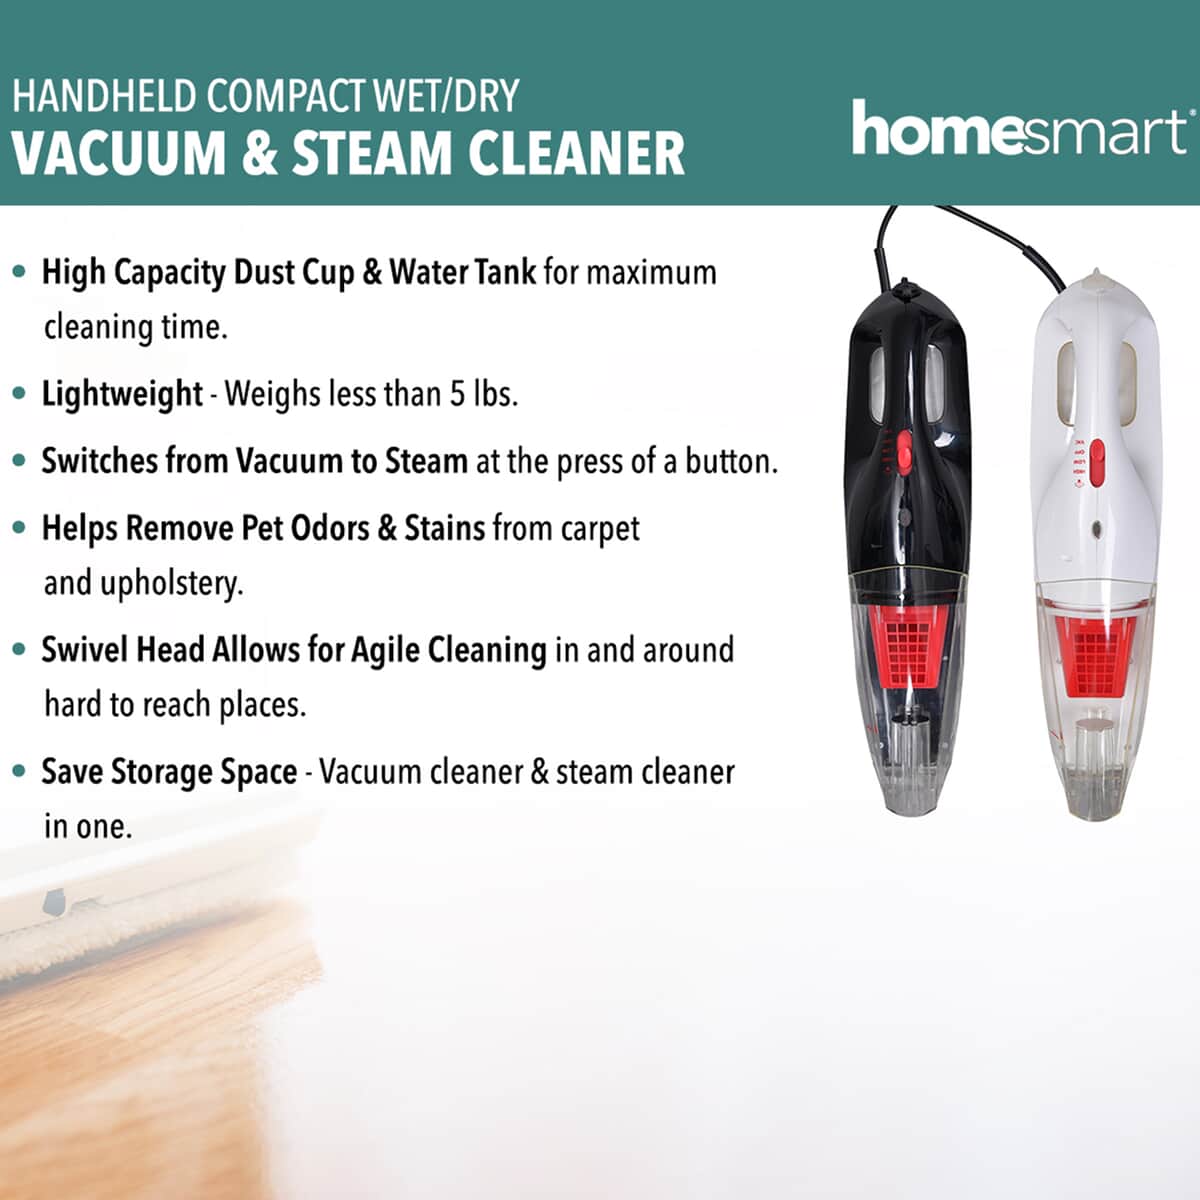 TLV Homesmart White Handheld Compact Wet and Dry Vacuum and Steam Cleaner image number 3